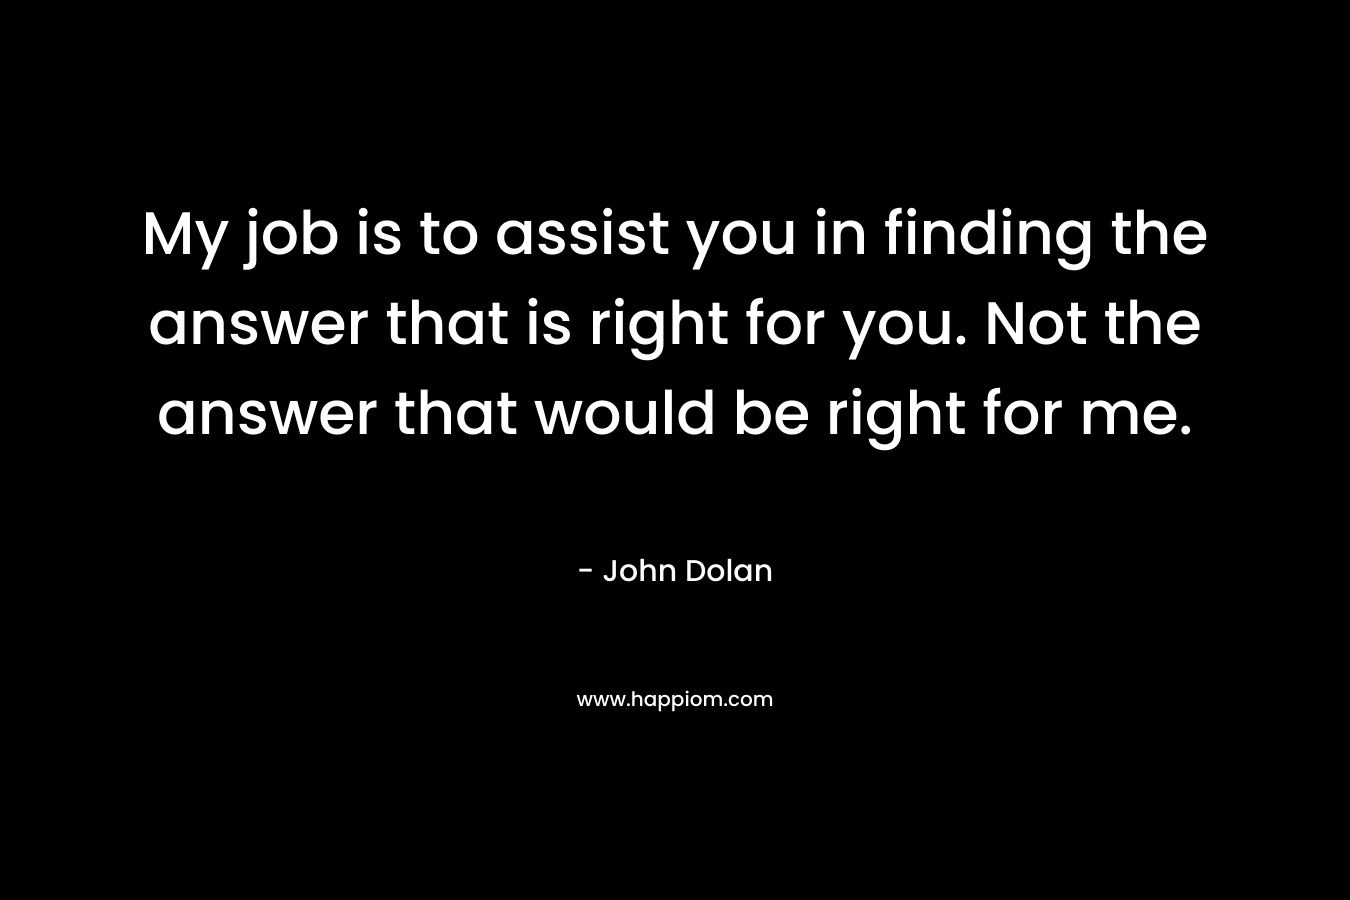 My job is to assist you in finding the answer that is right for you. Not the answer that would be right for me.